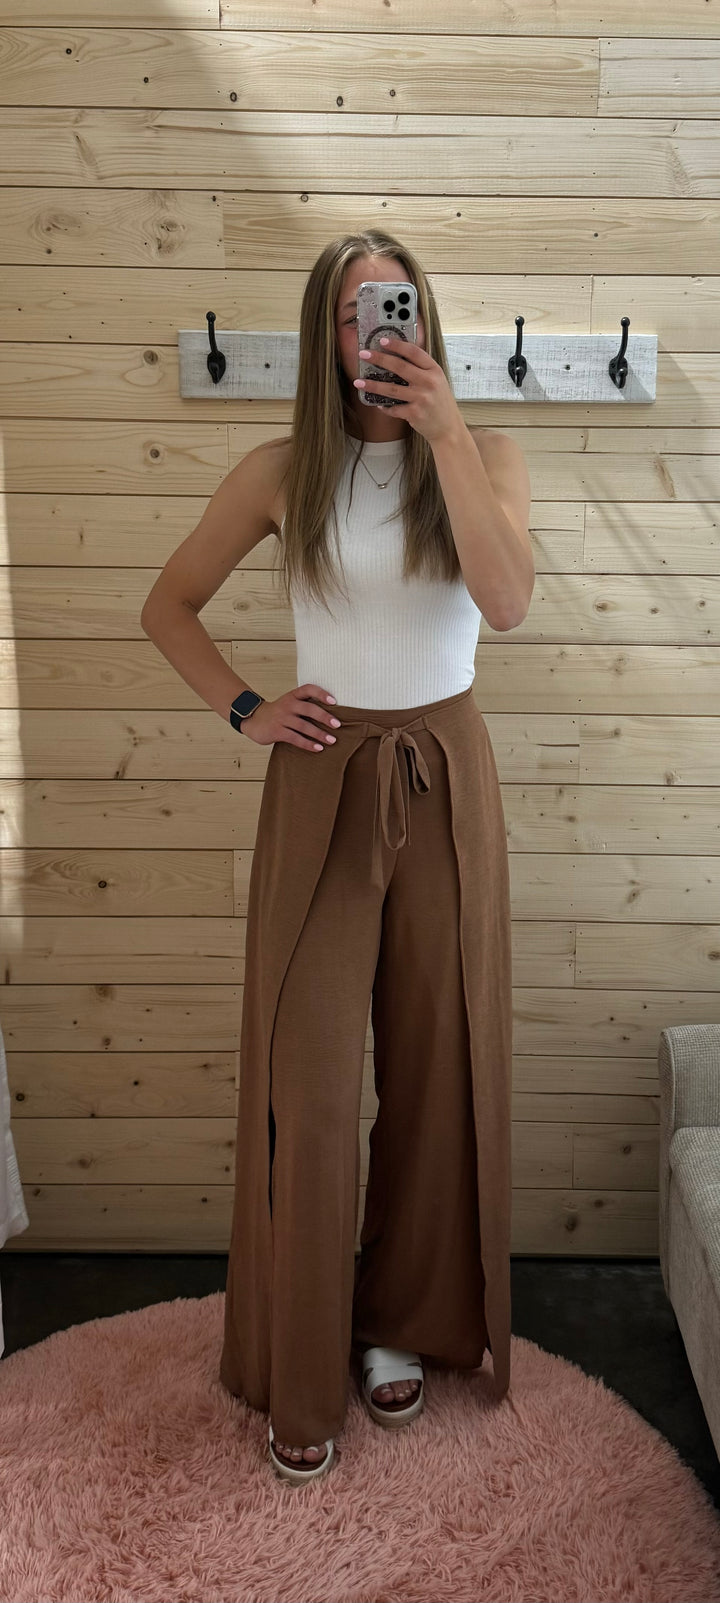 Tie Front Open Side Pant